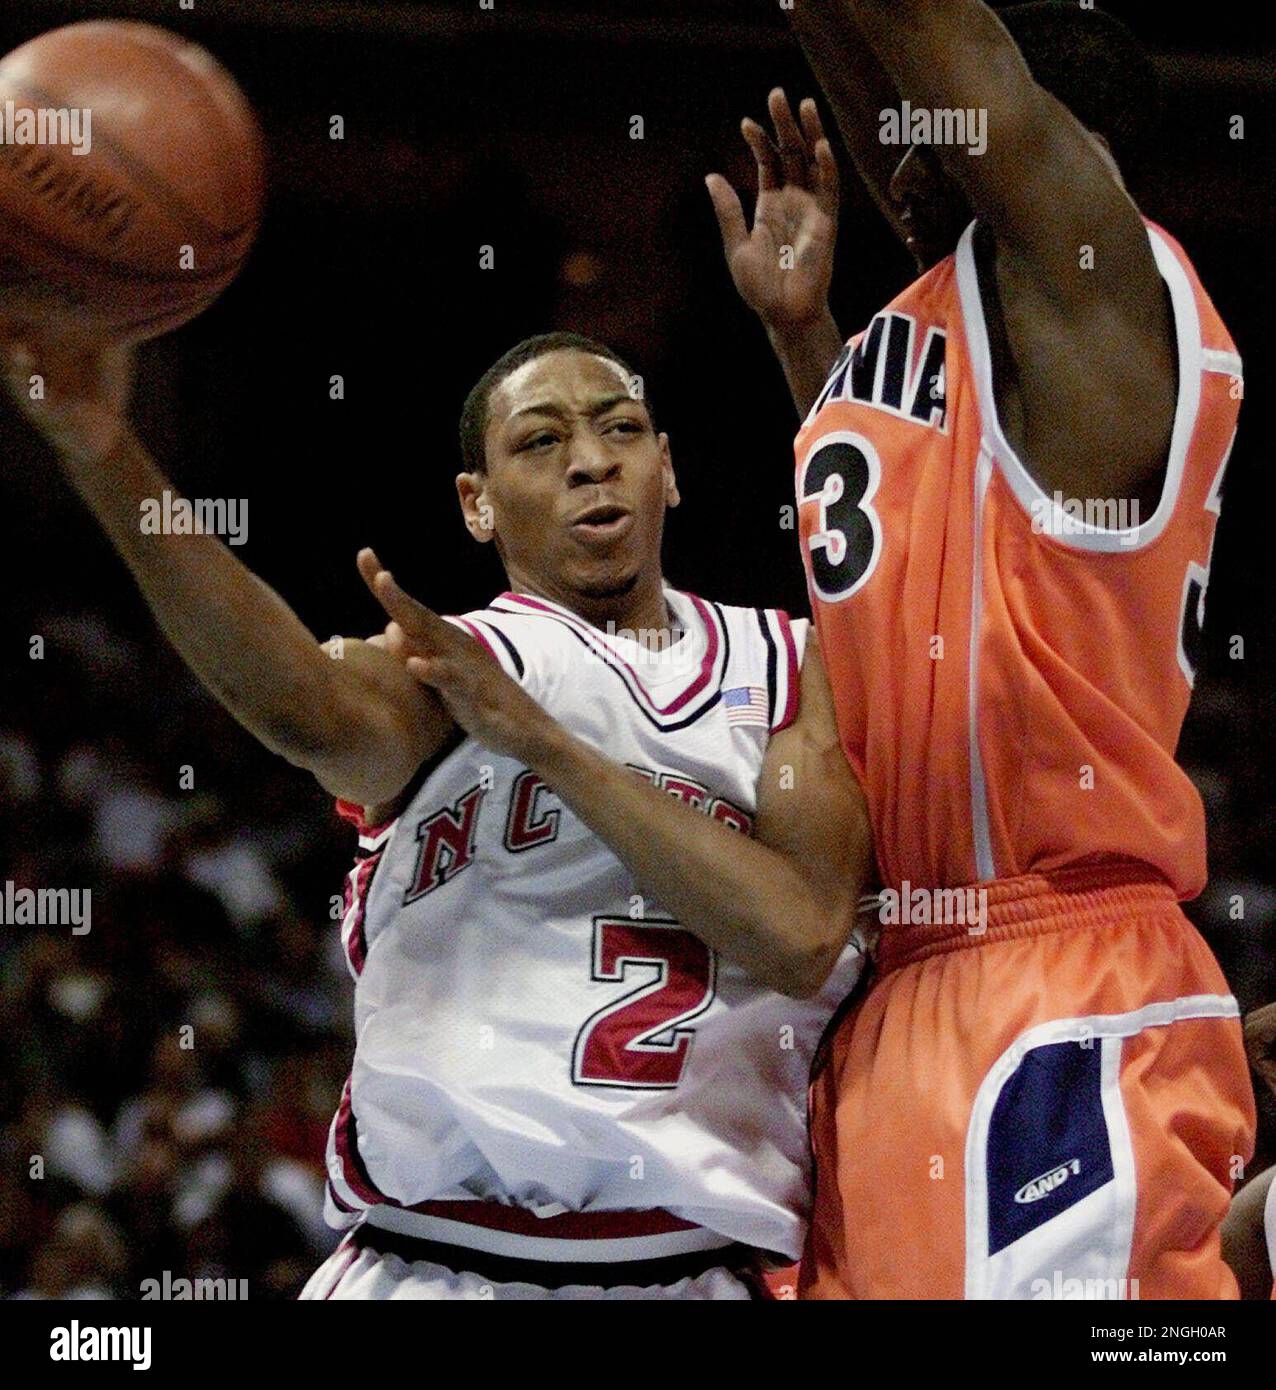 North Carolina State's Anthony Grundy (2) flies past Virginia's Travis Watson late in the second half at the ACC Men's Basketball Tournament Friday, March 8, 2002, in Charlotte, N.C. (AP Photo/Gerry Groome) Stock Photo